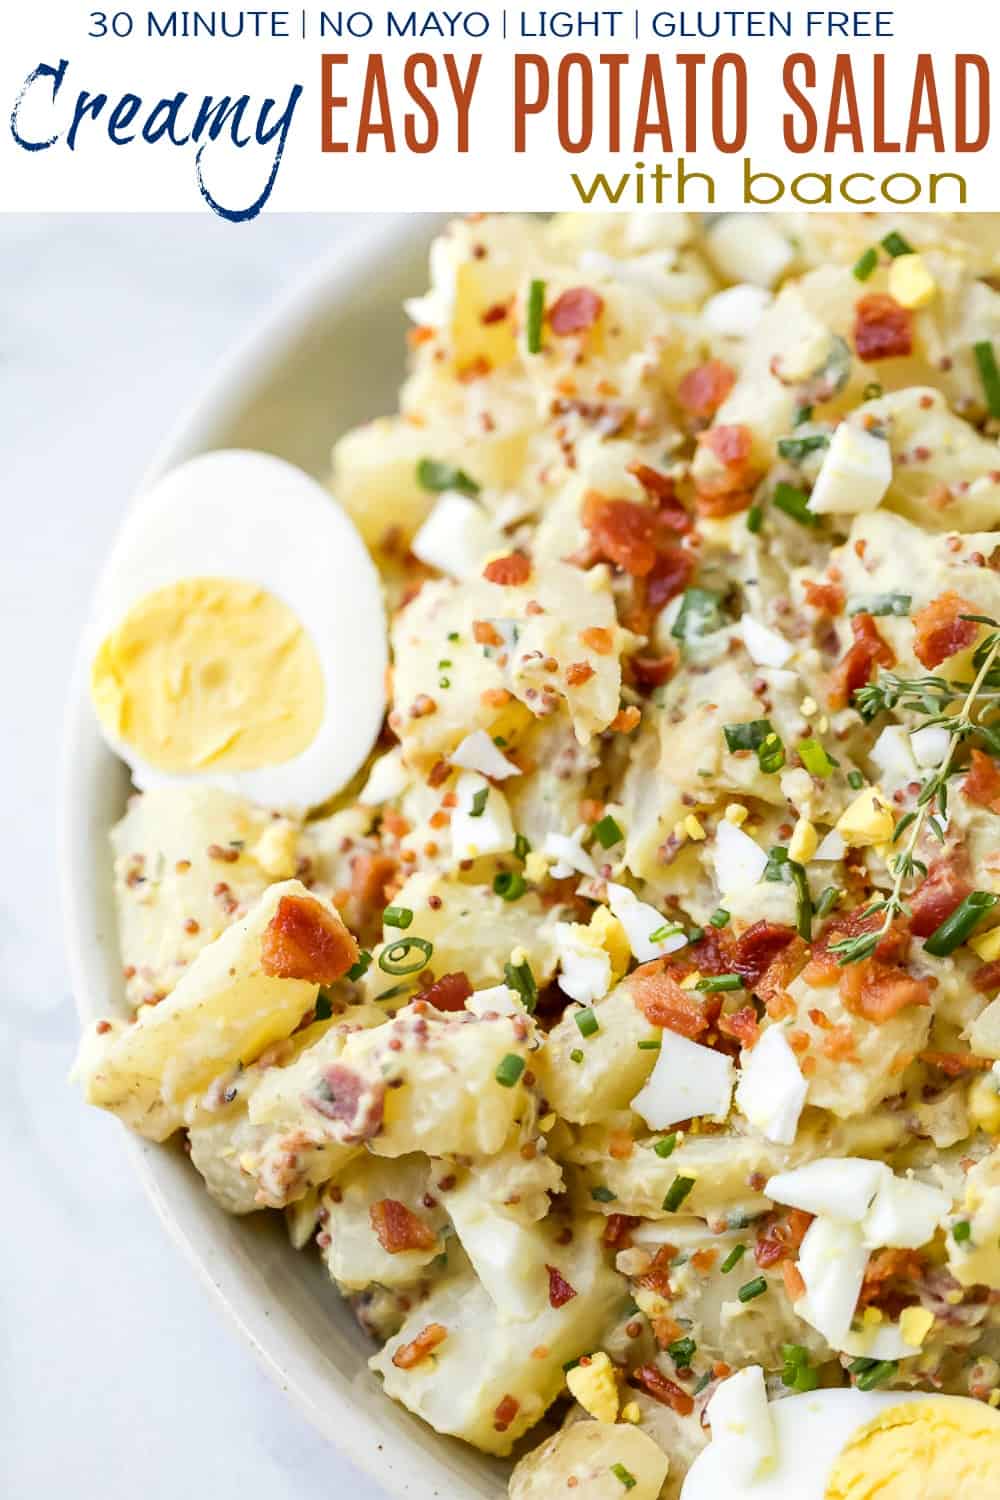 Recipe collage for creamy easy potato salad with bacon